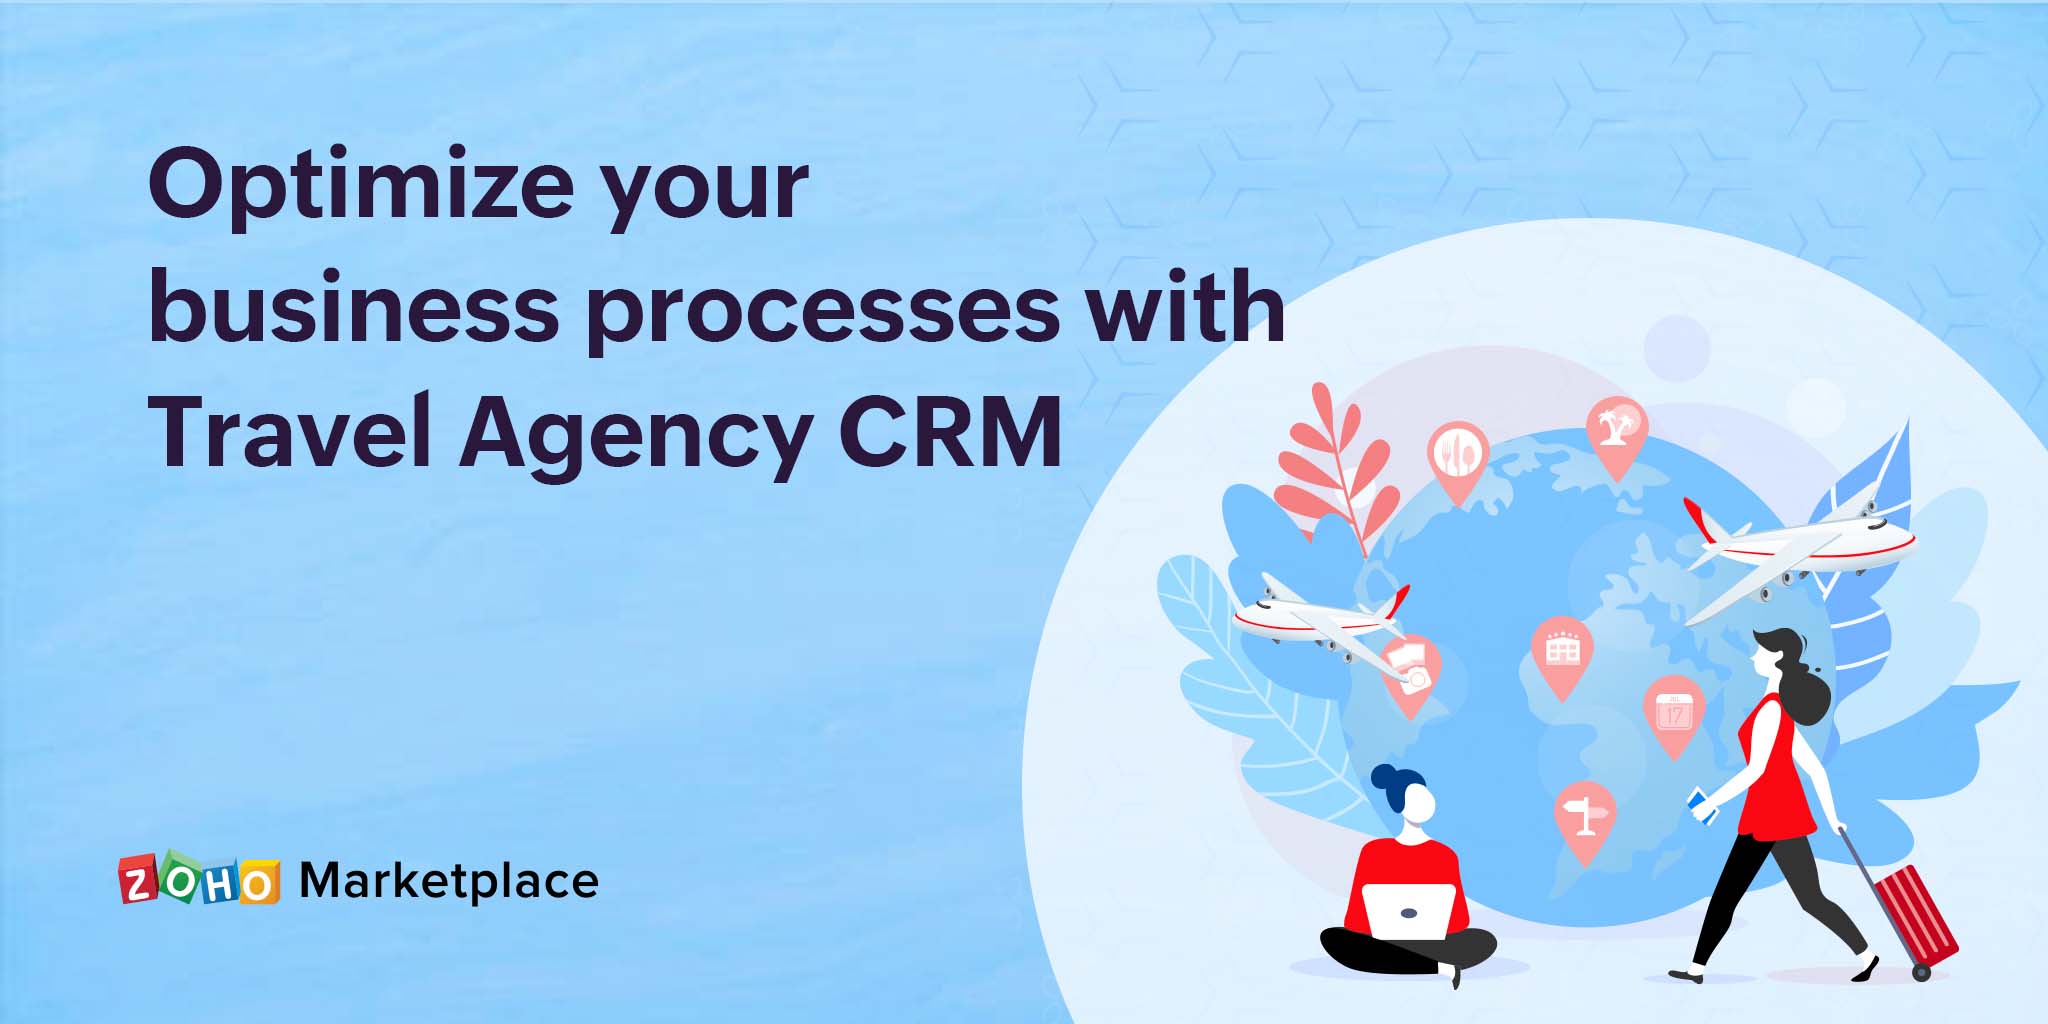 Optimize your business processes with Travel Agency CRM